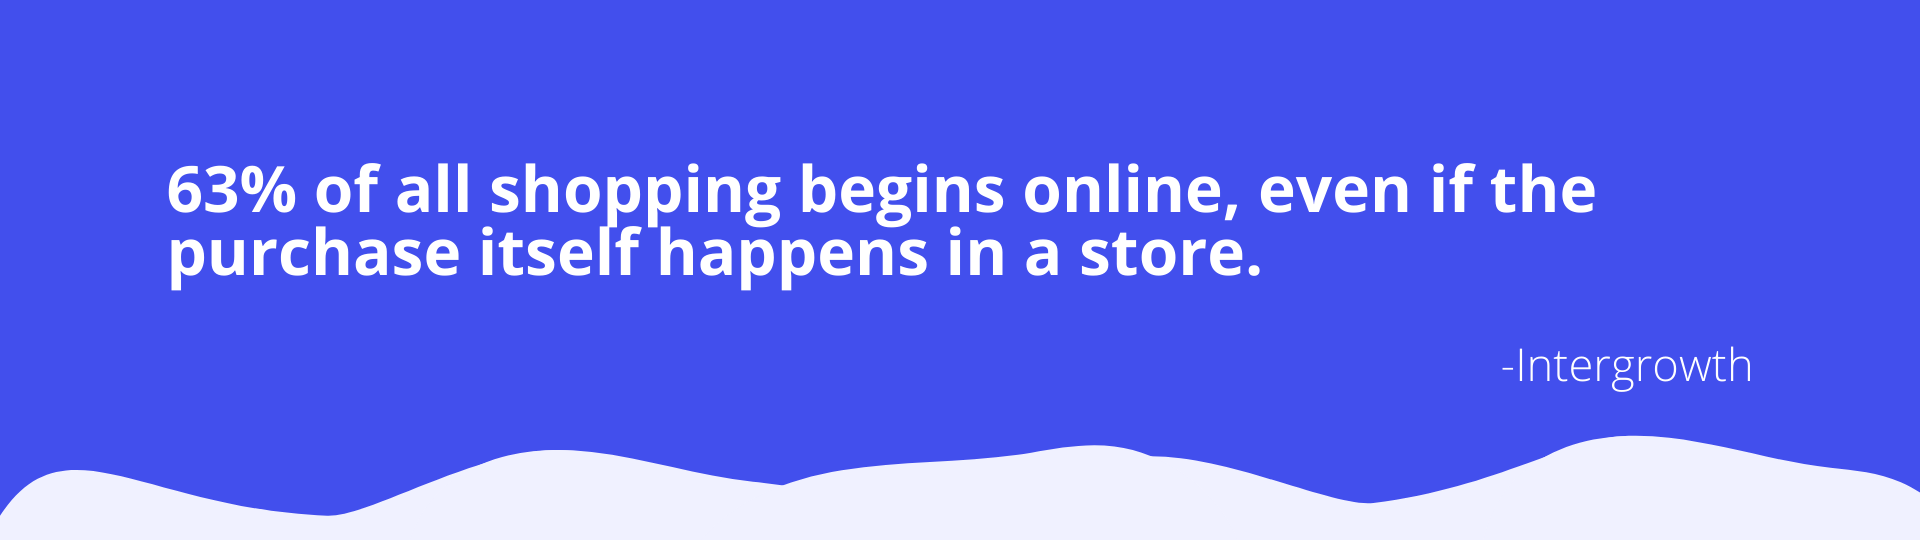 63% of all shopping begins online, even if the purchase itself happens in a store. - Agency Jet